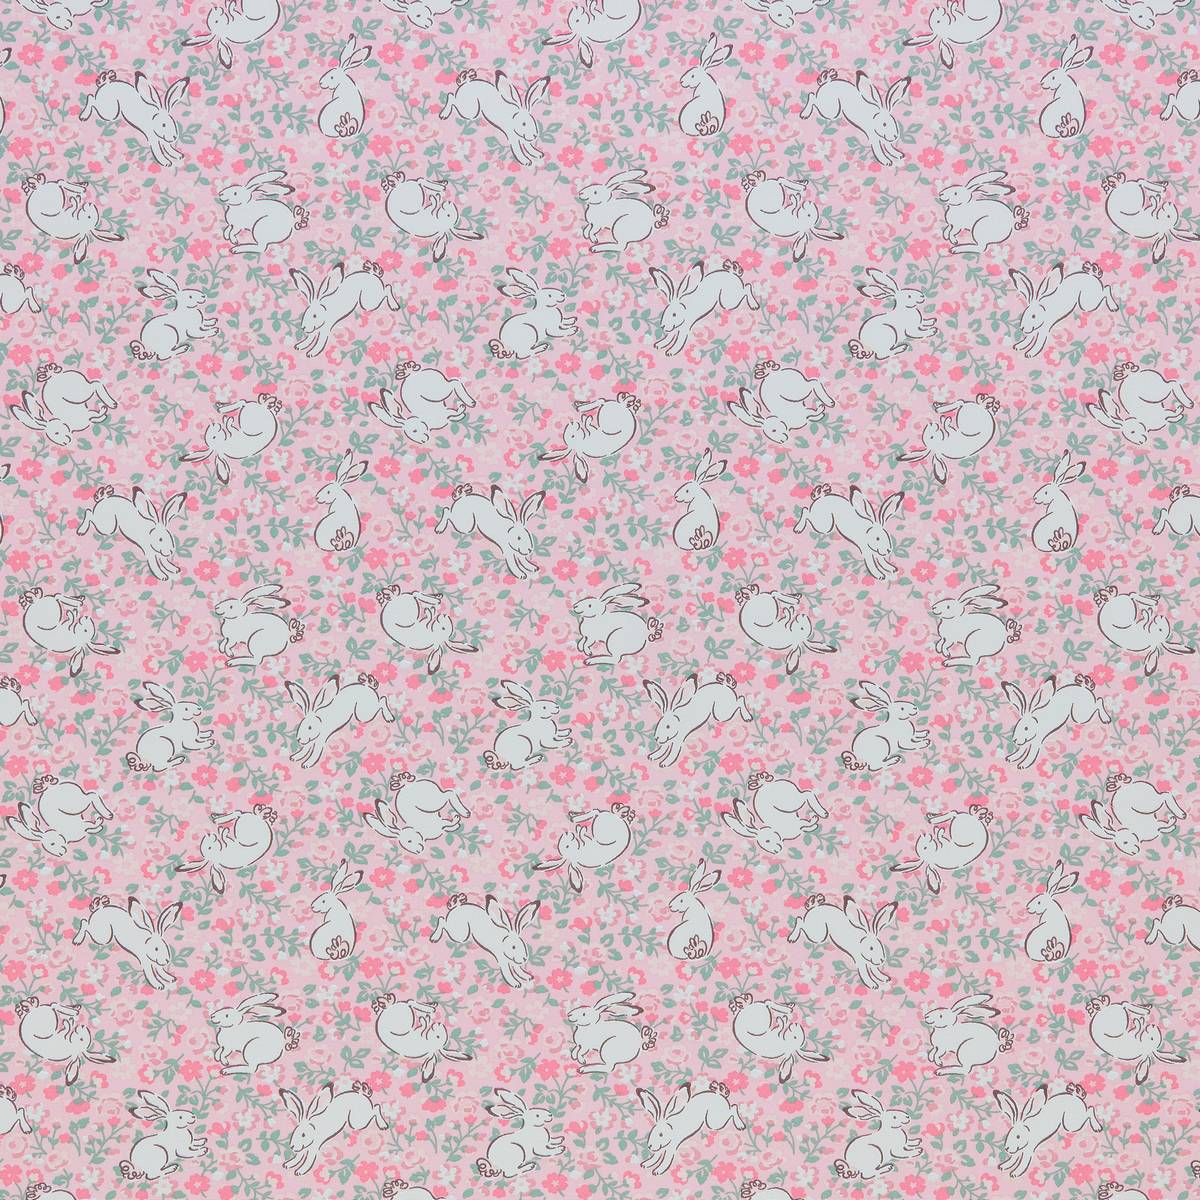 Jumping Bunnies Blush Fabric by Cath Kidston